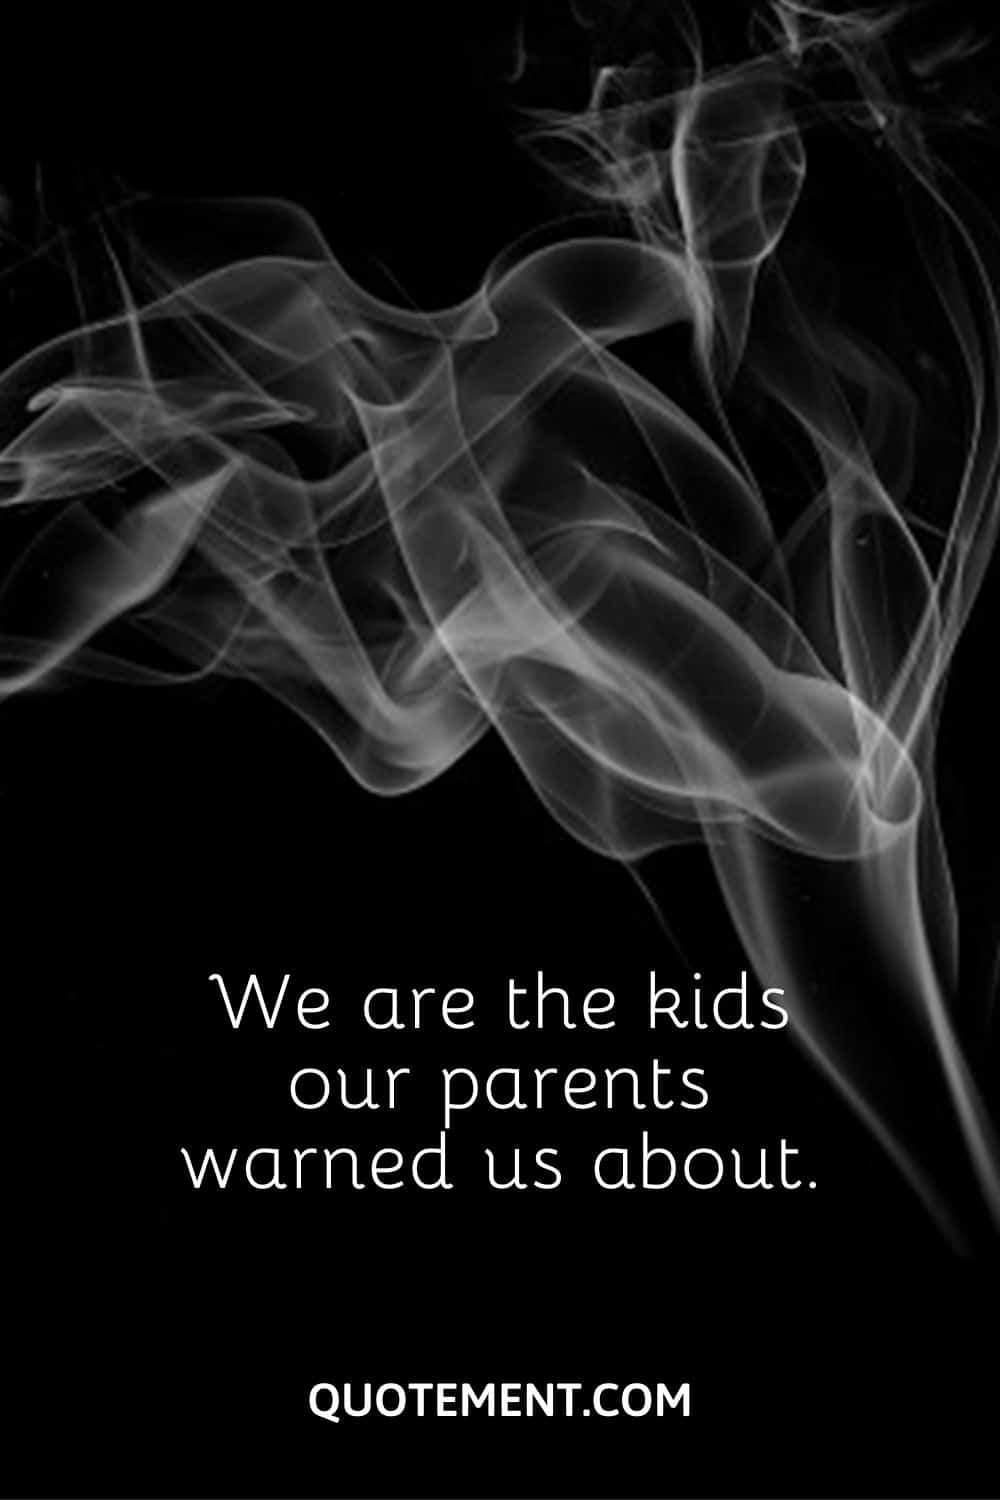 We are the kids our parents warned us about.